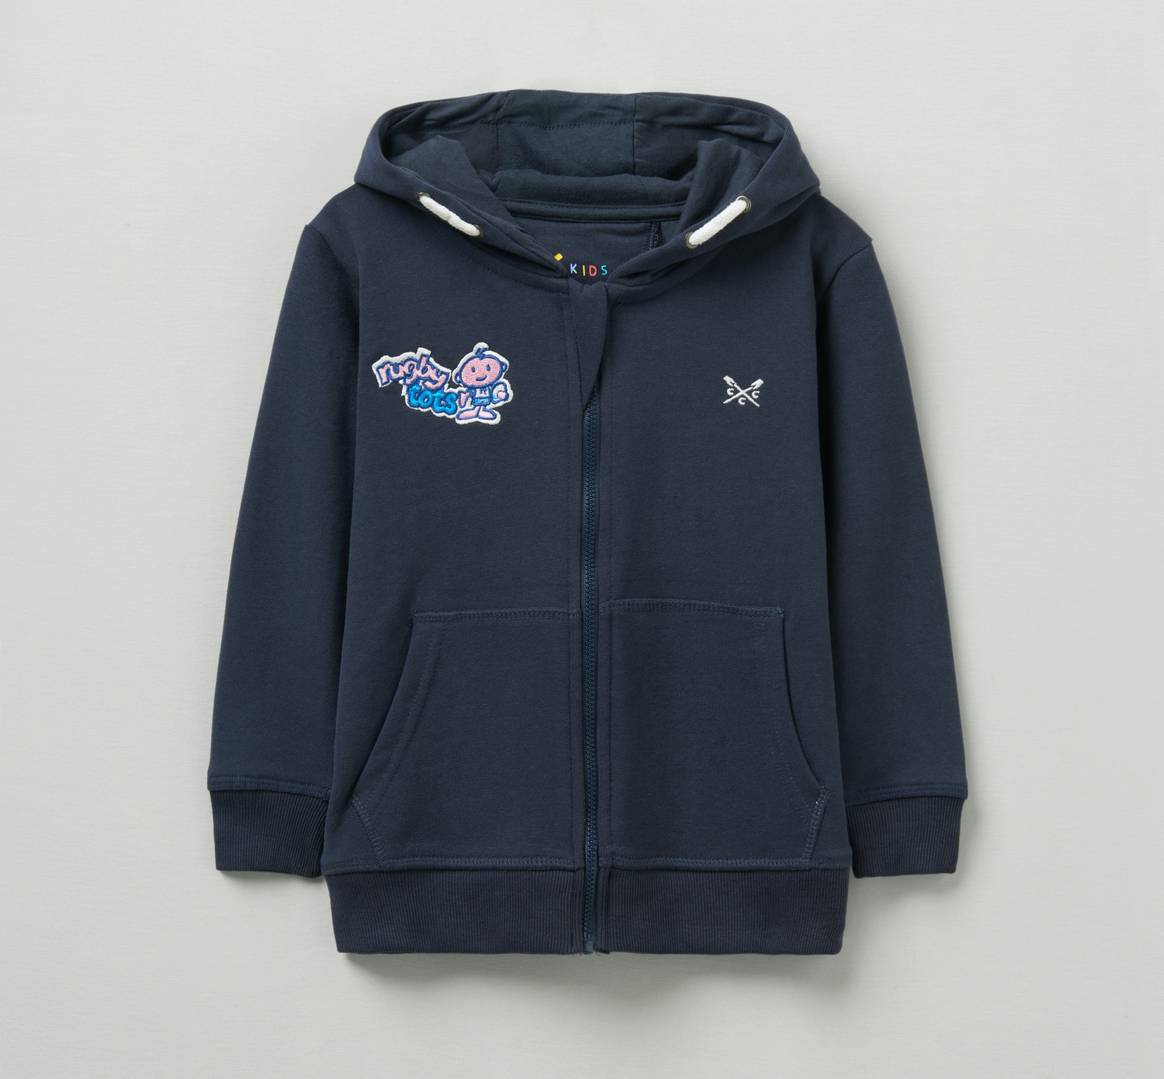 Image: Crew Clothing; Rugbytots capsule collection